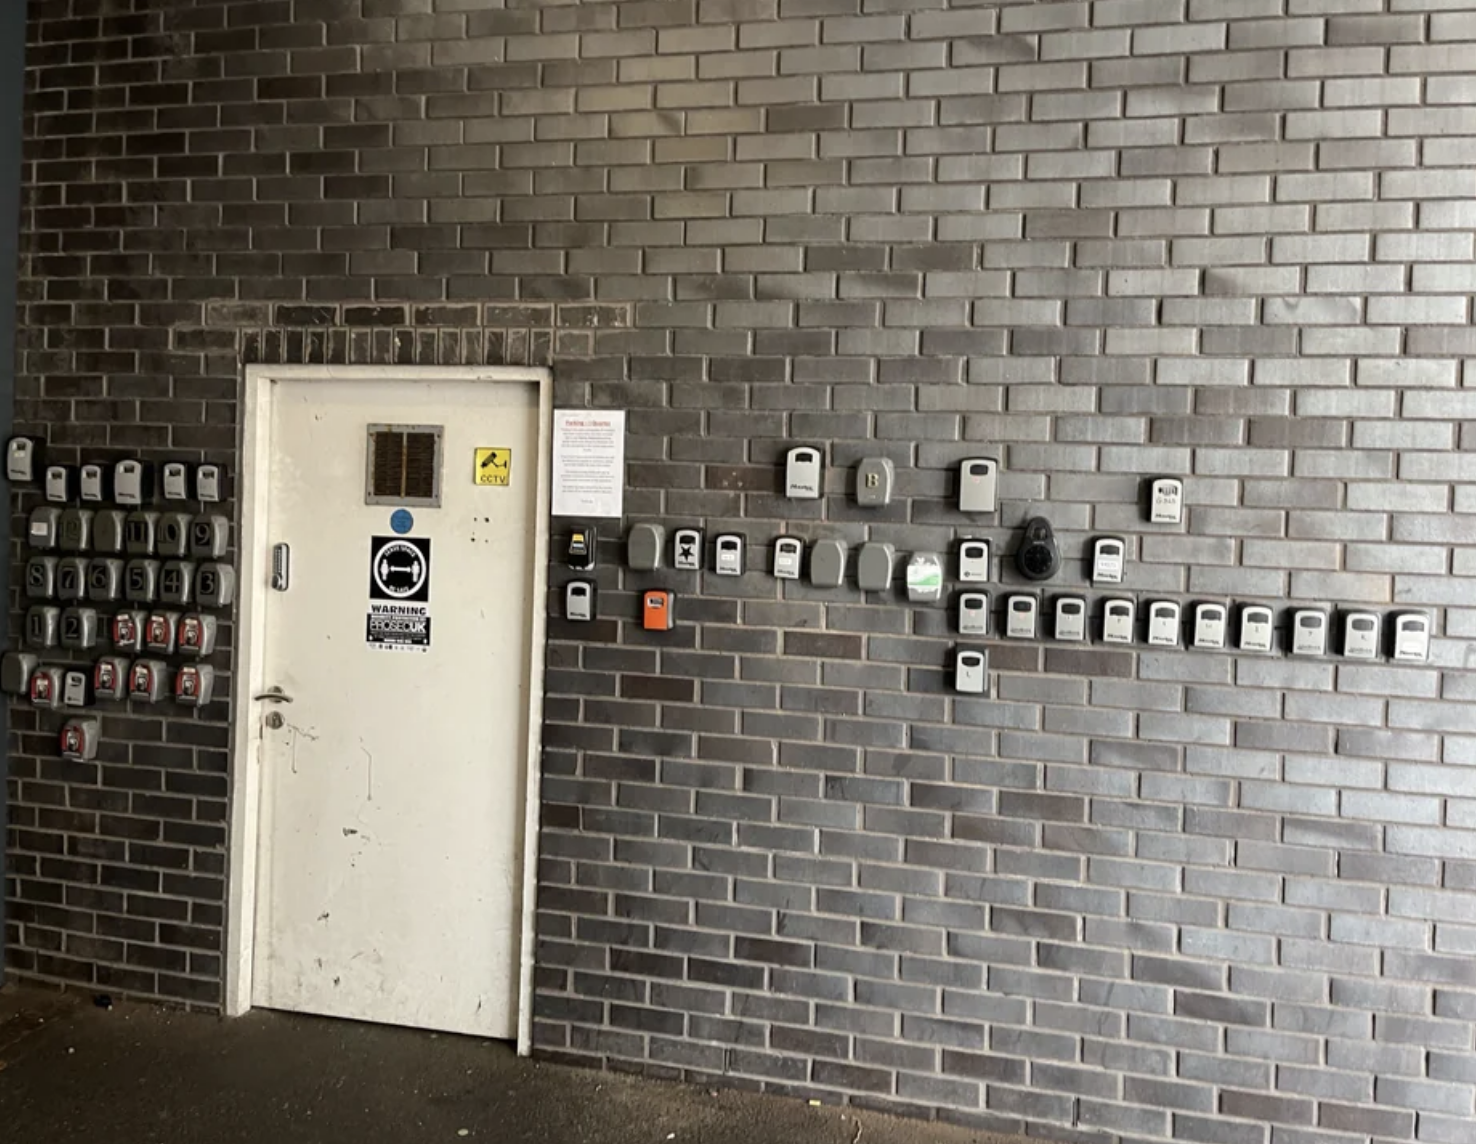 There are approximately 15 key safes installed on the wall that look exactly the same and all match the description provided